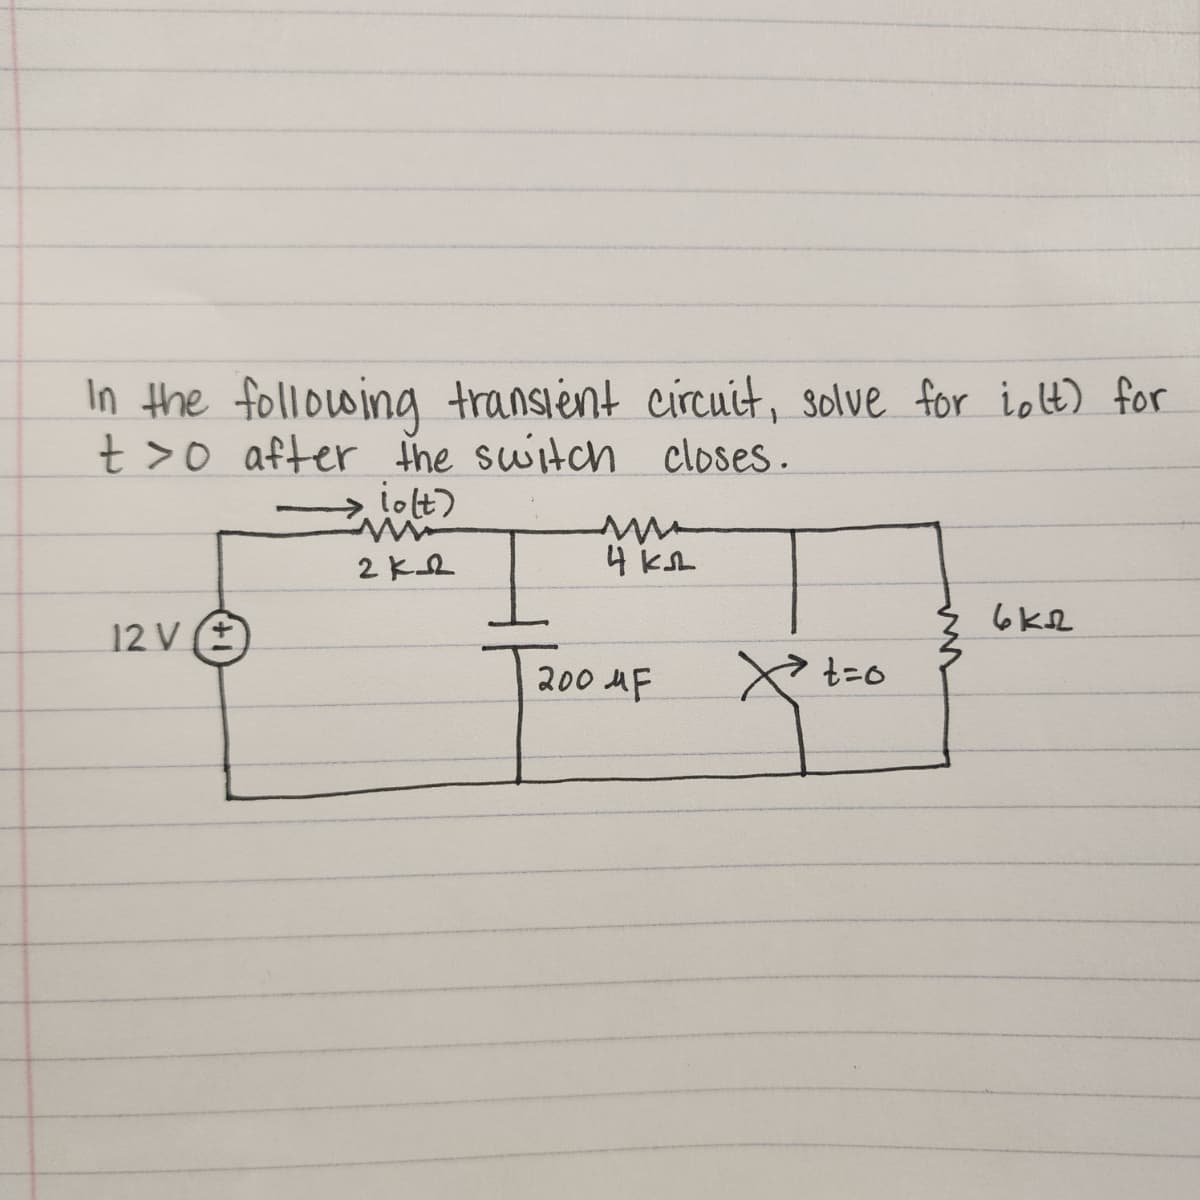 In the following transient circuit, solve for iolt) for
t>o after the switch closes.
iolt)
2 ΚΩ
ww
4 кл
12 V
200 MF
6k2